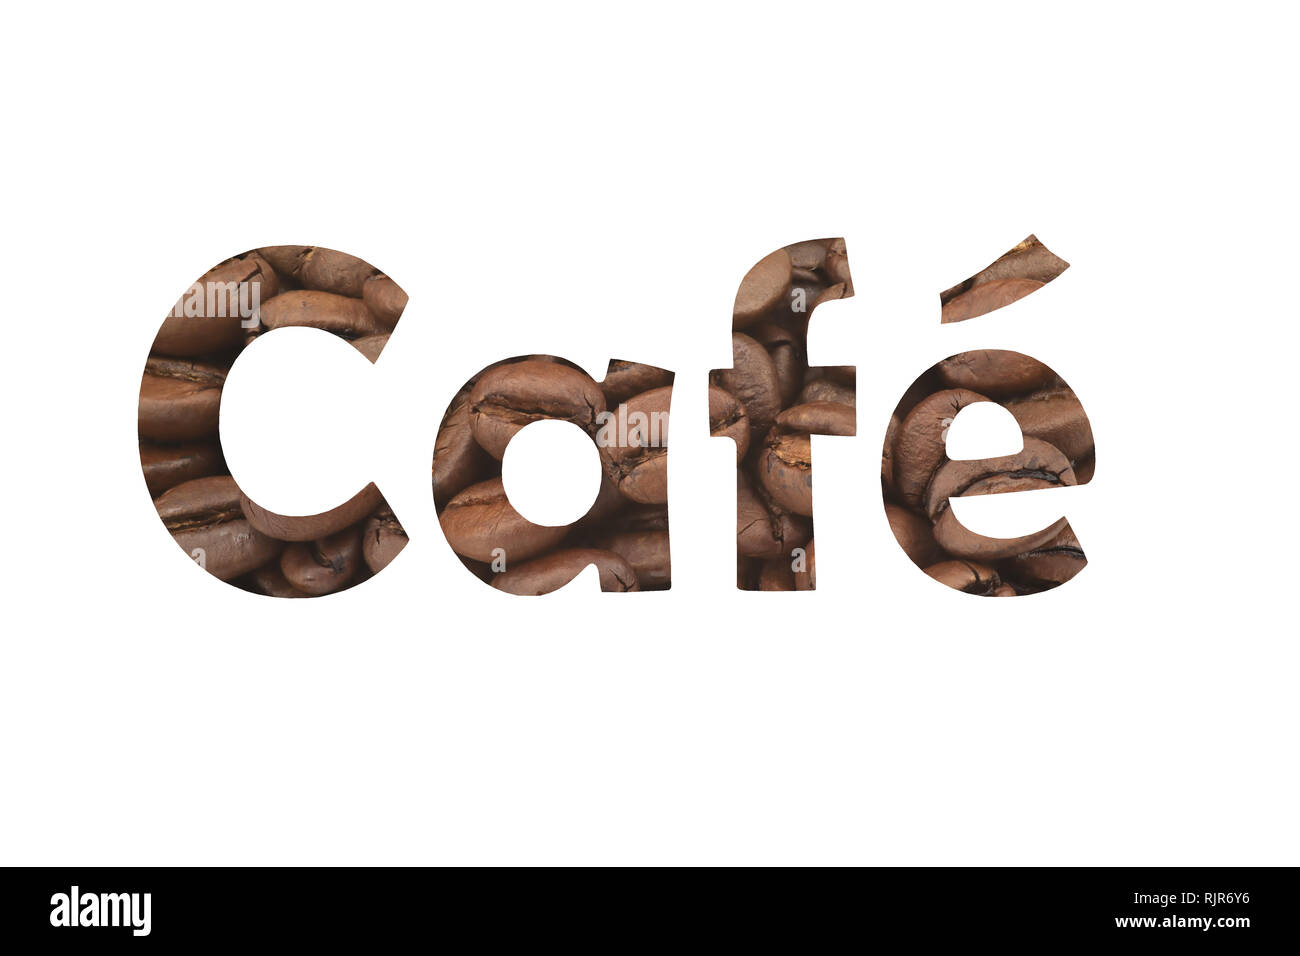 The word cafe cut out of a closeup of roasted coffee beans Stock Photo